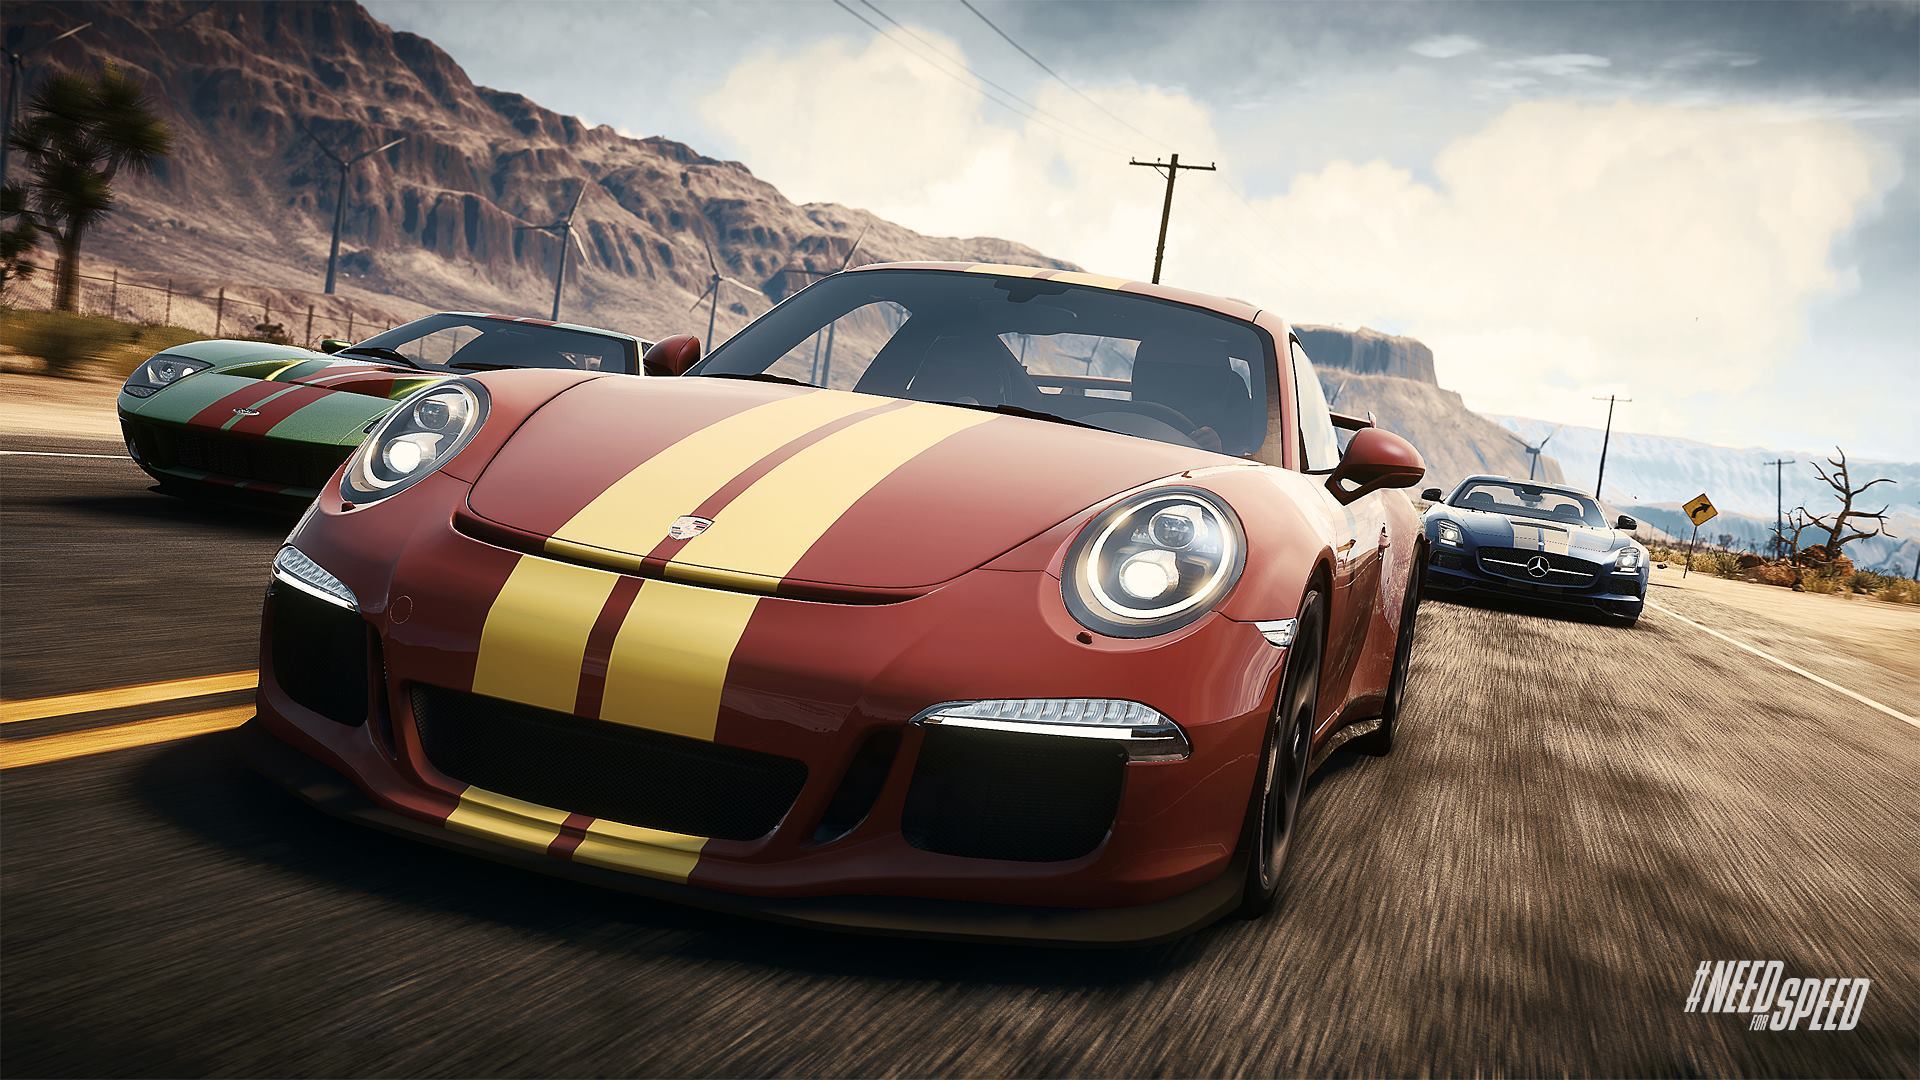 Нидфорспид. NFS Rivals Ford gt. NFS Rivals Porshe. Need for Speed Rivals Порше. Need for Speed Rivals машины.